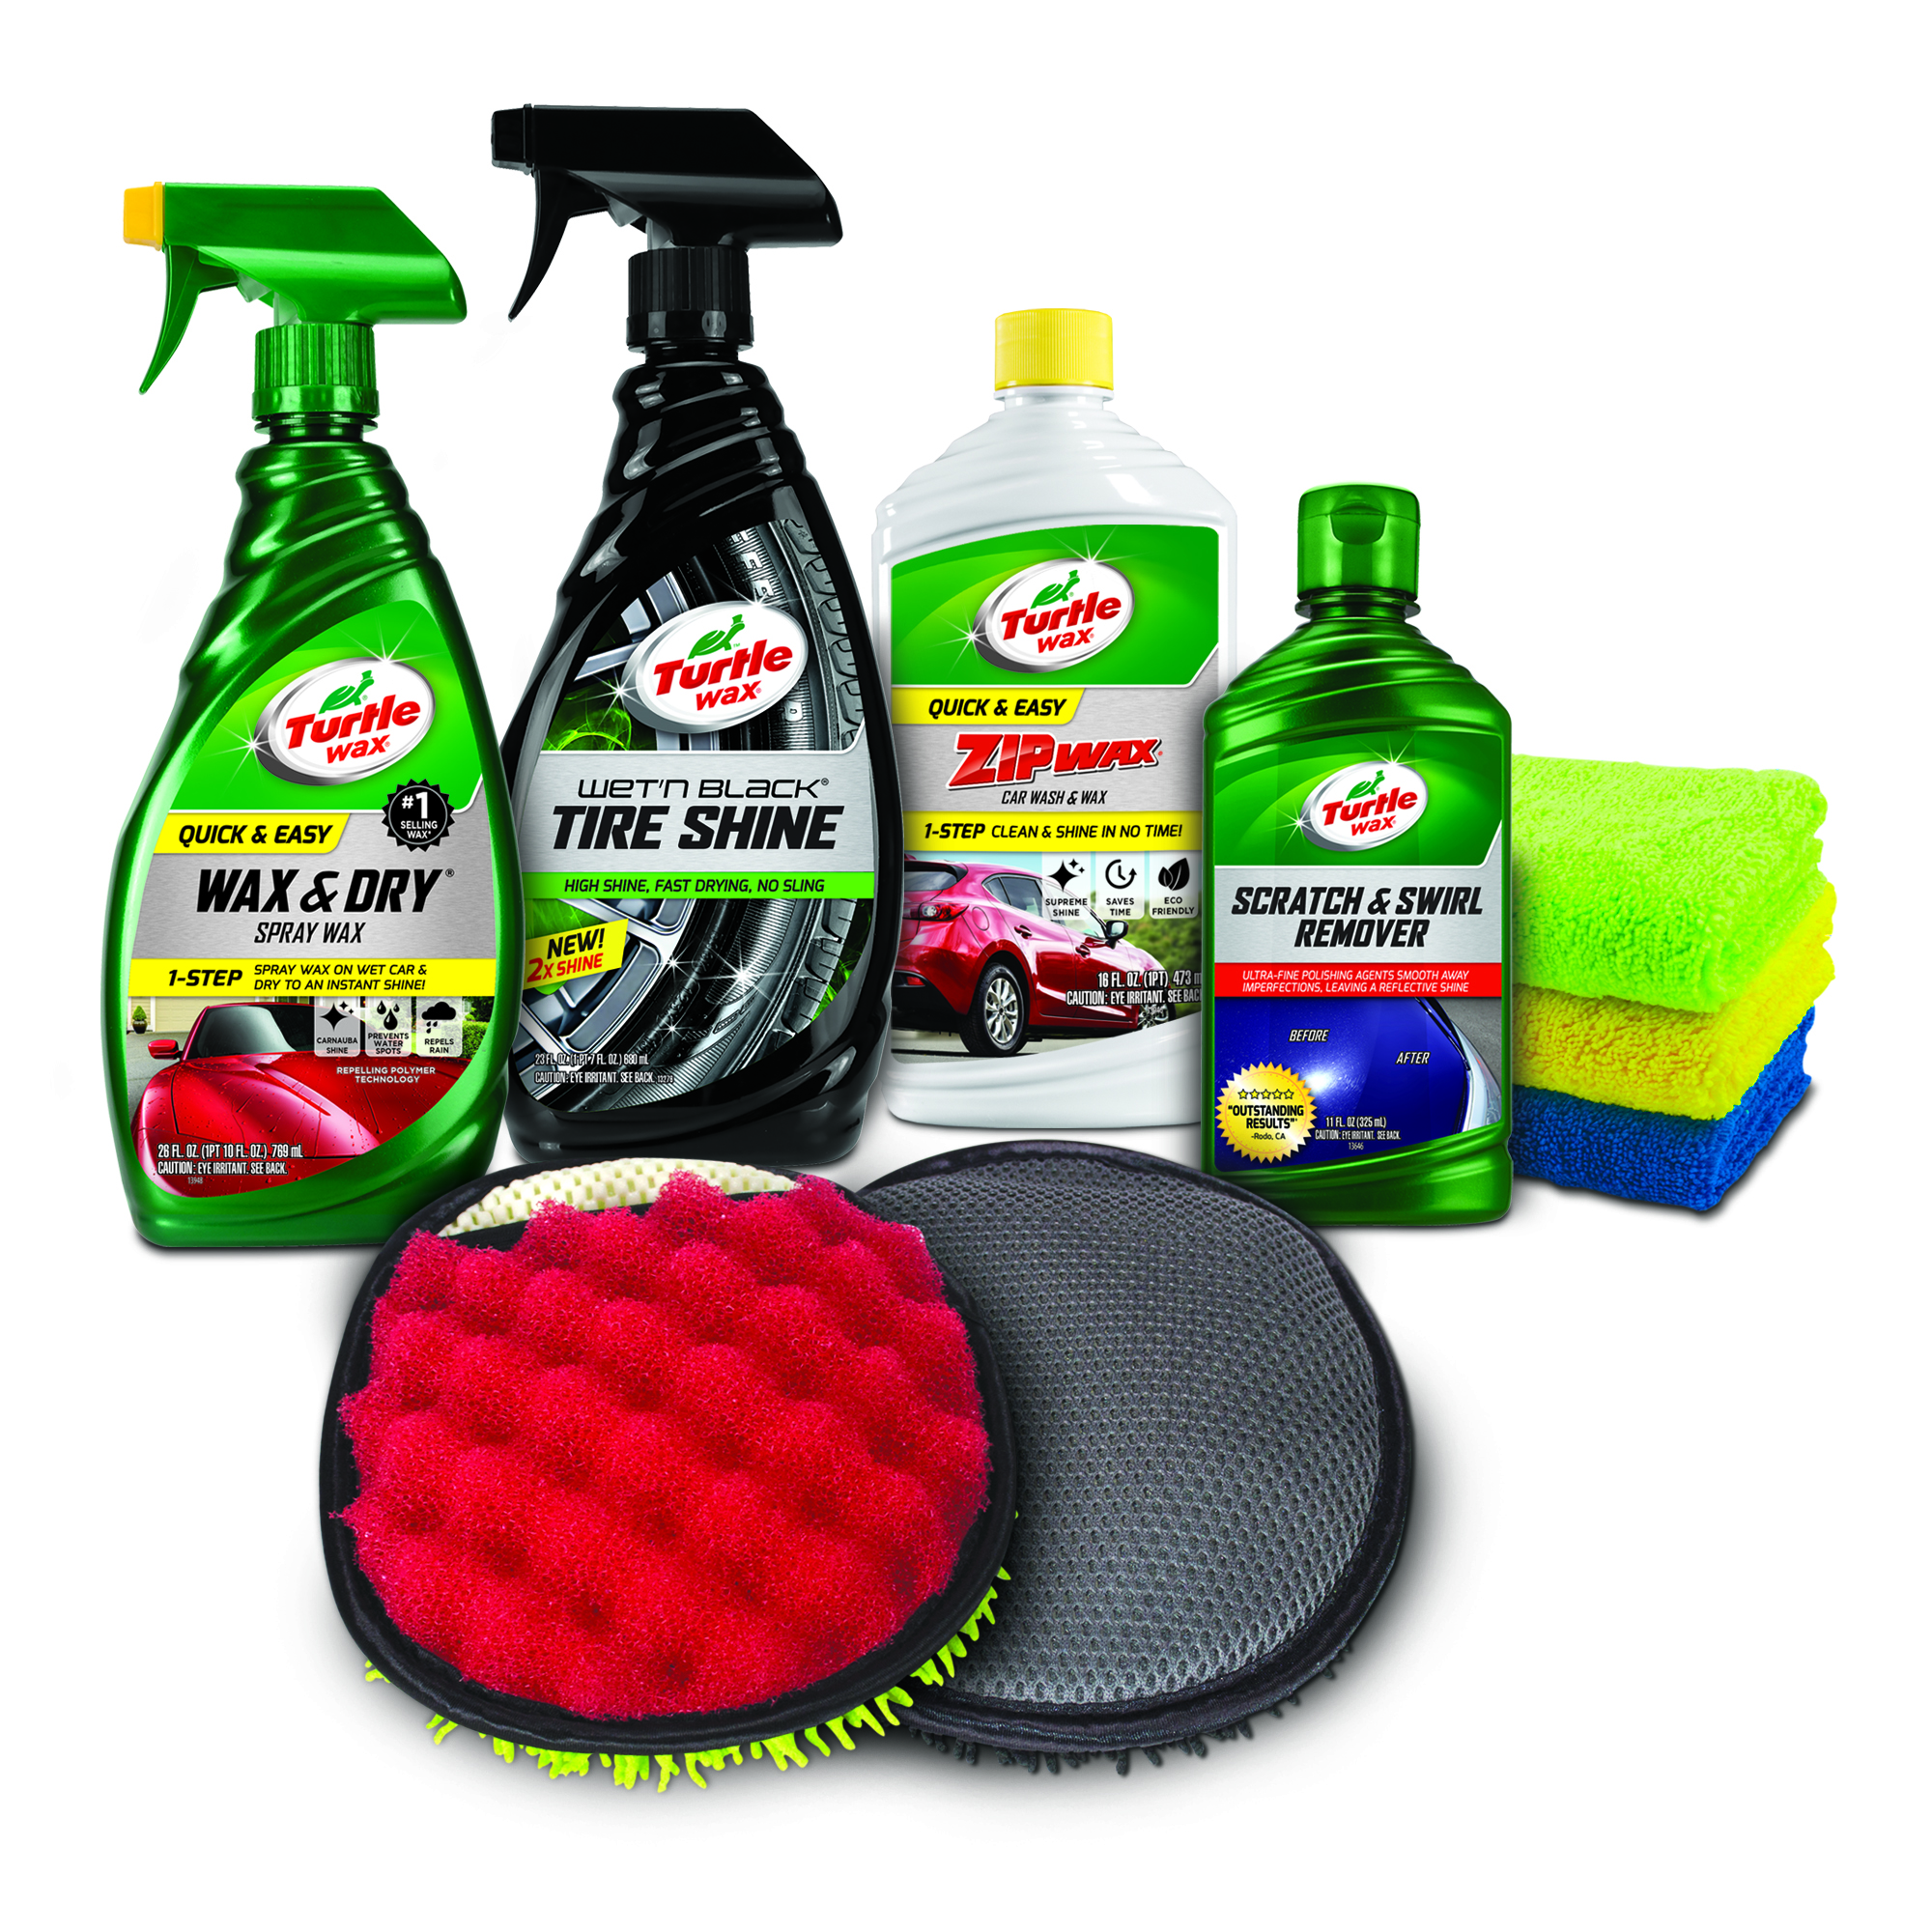 Turtle Wax Total Exterior Car Care Kit - image 1 of 5